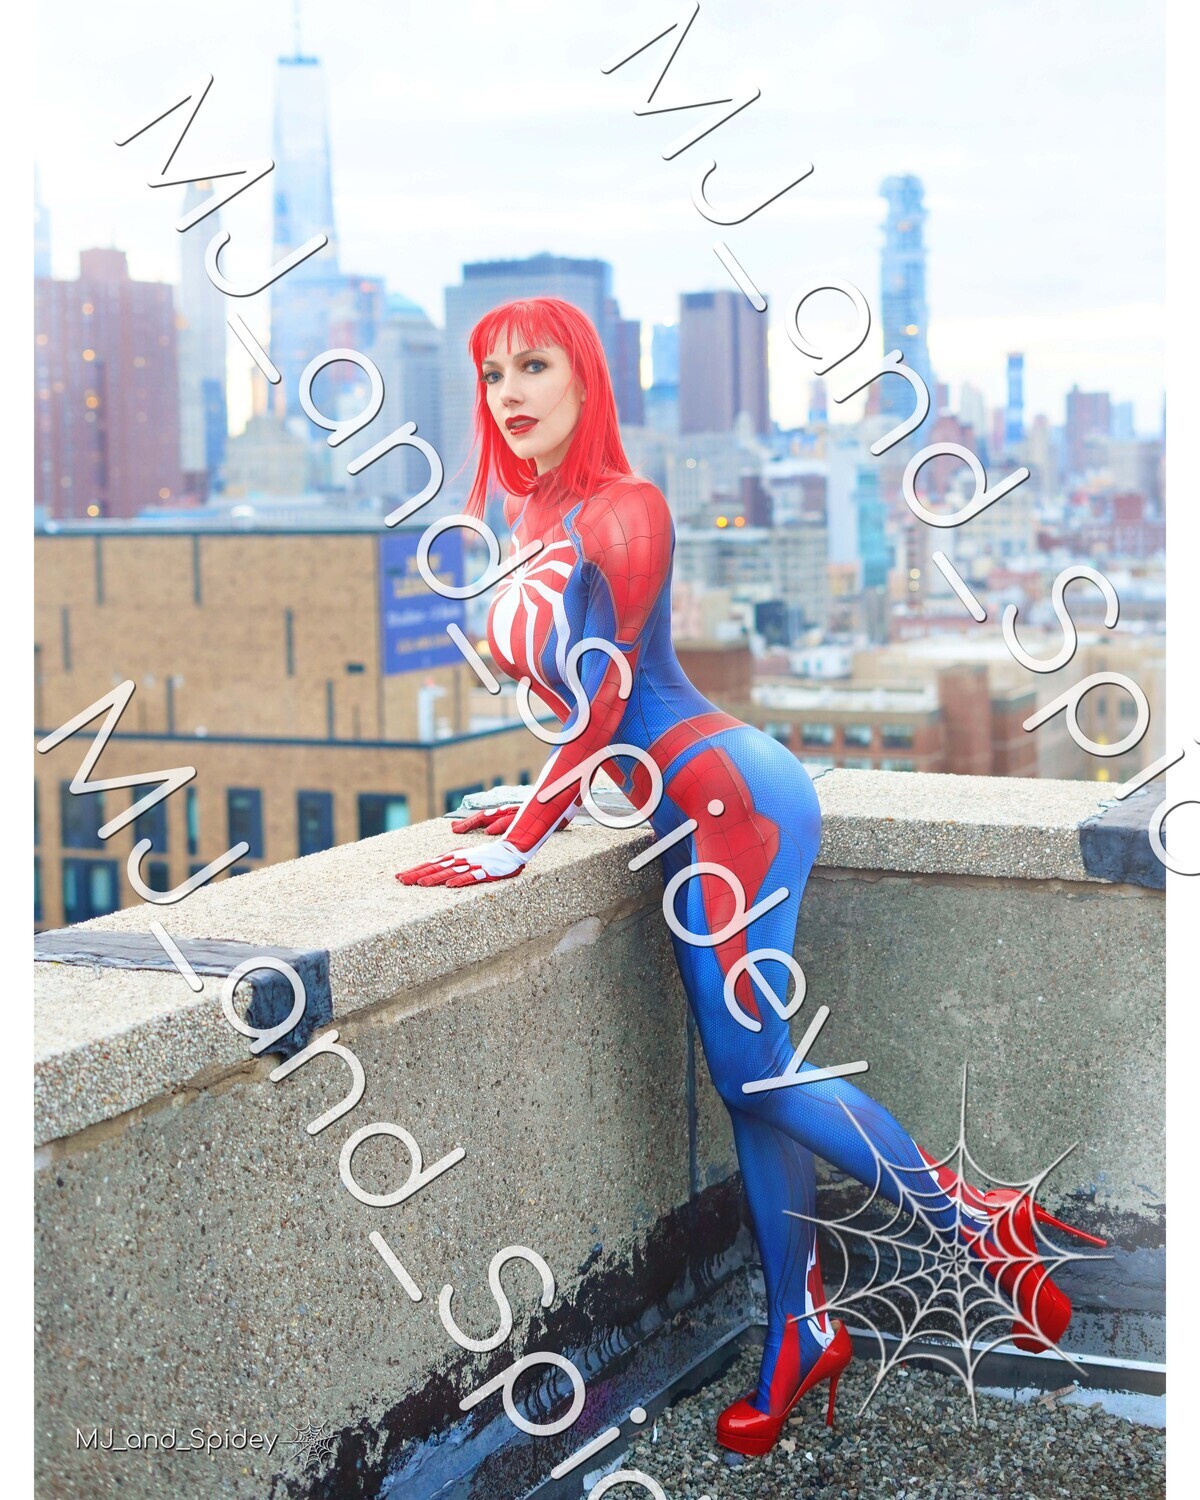 Marvel - Spider-Man - Mary Jane Watson - PS4 Insomniac Spider-Suit 4 - Digital Cosplay Image (@MJ_and_Spidey, MJ and Spidey, Comics)